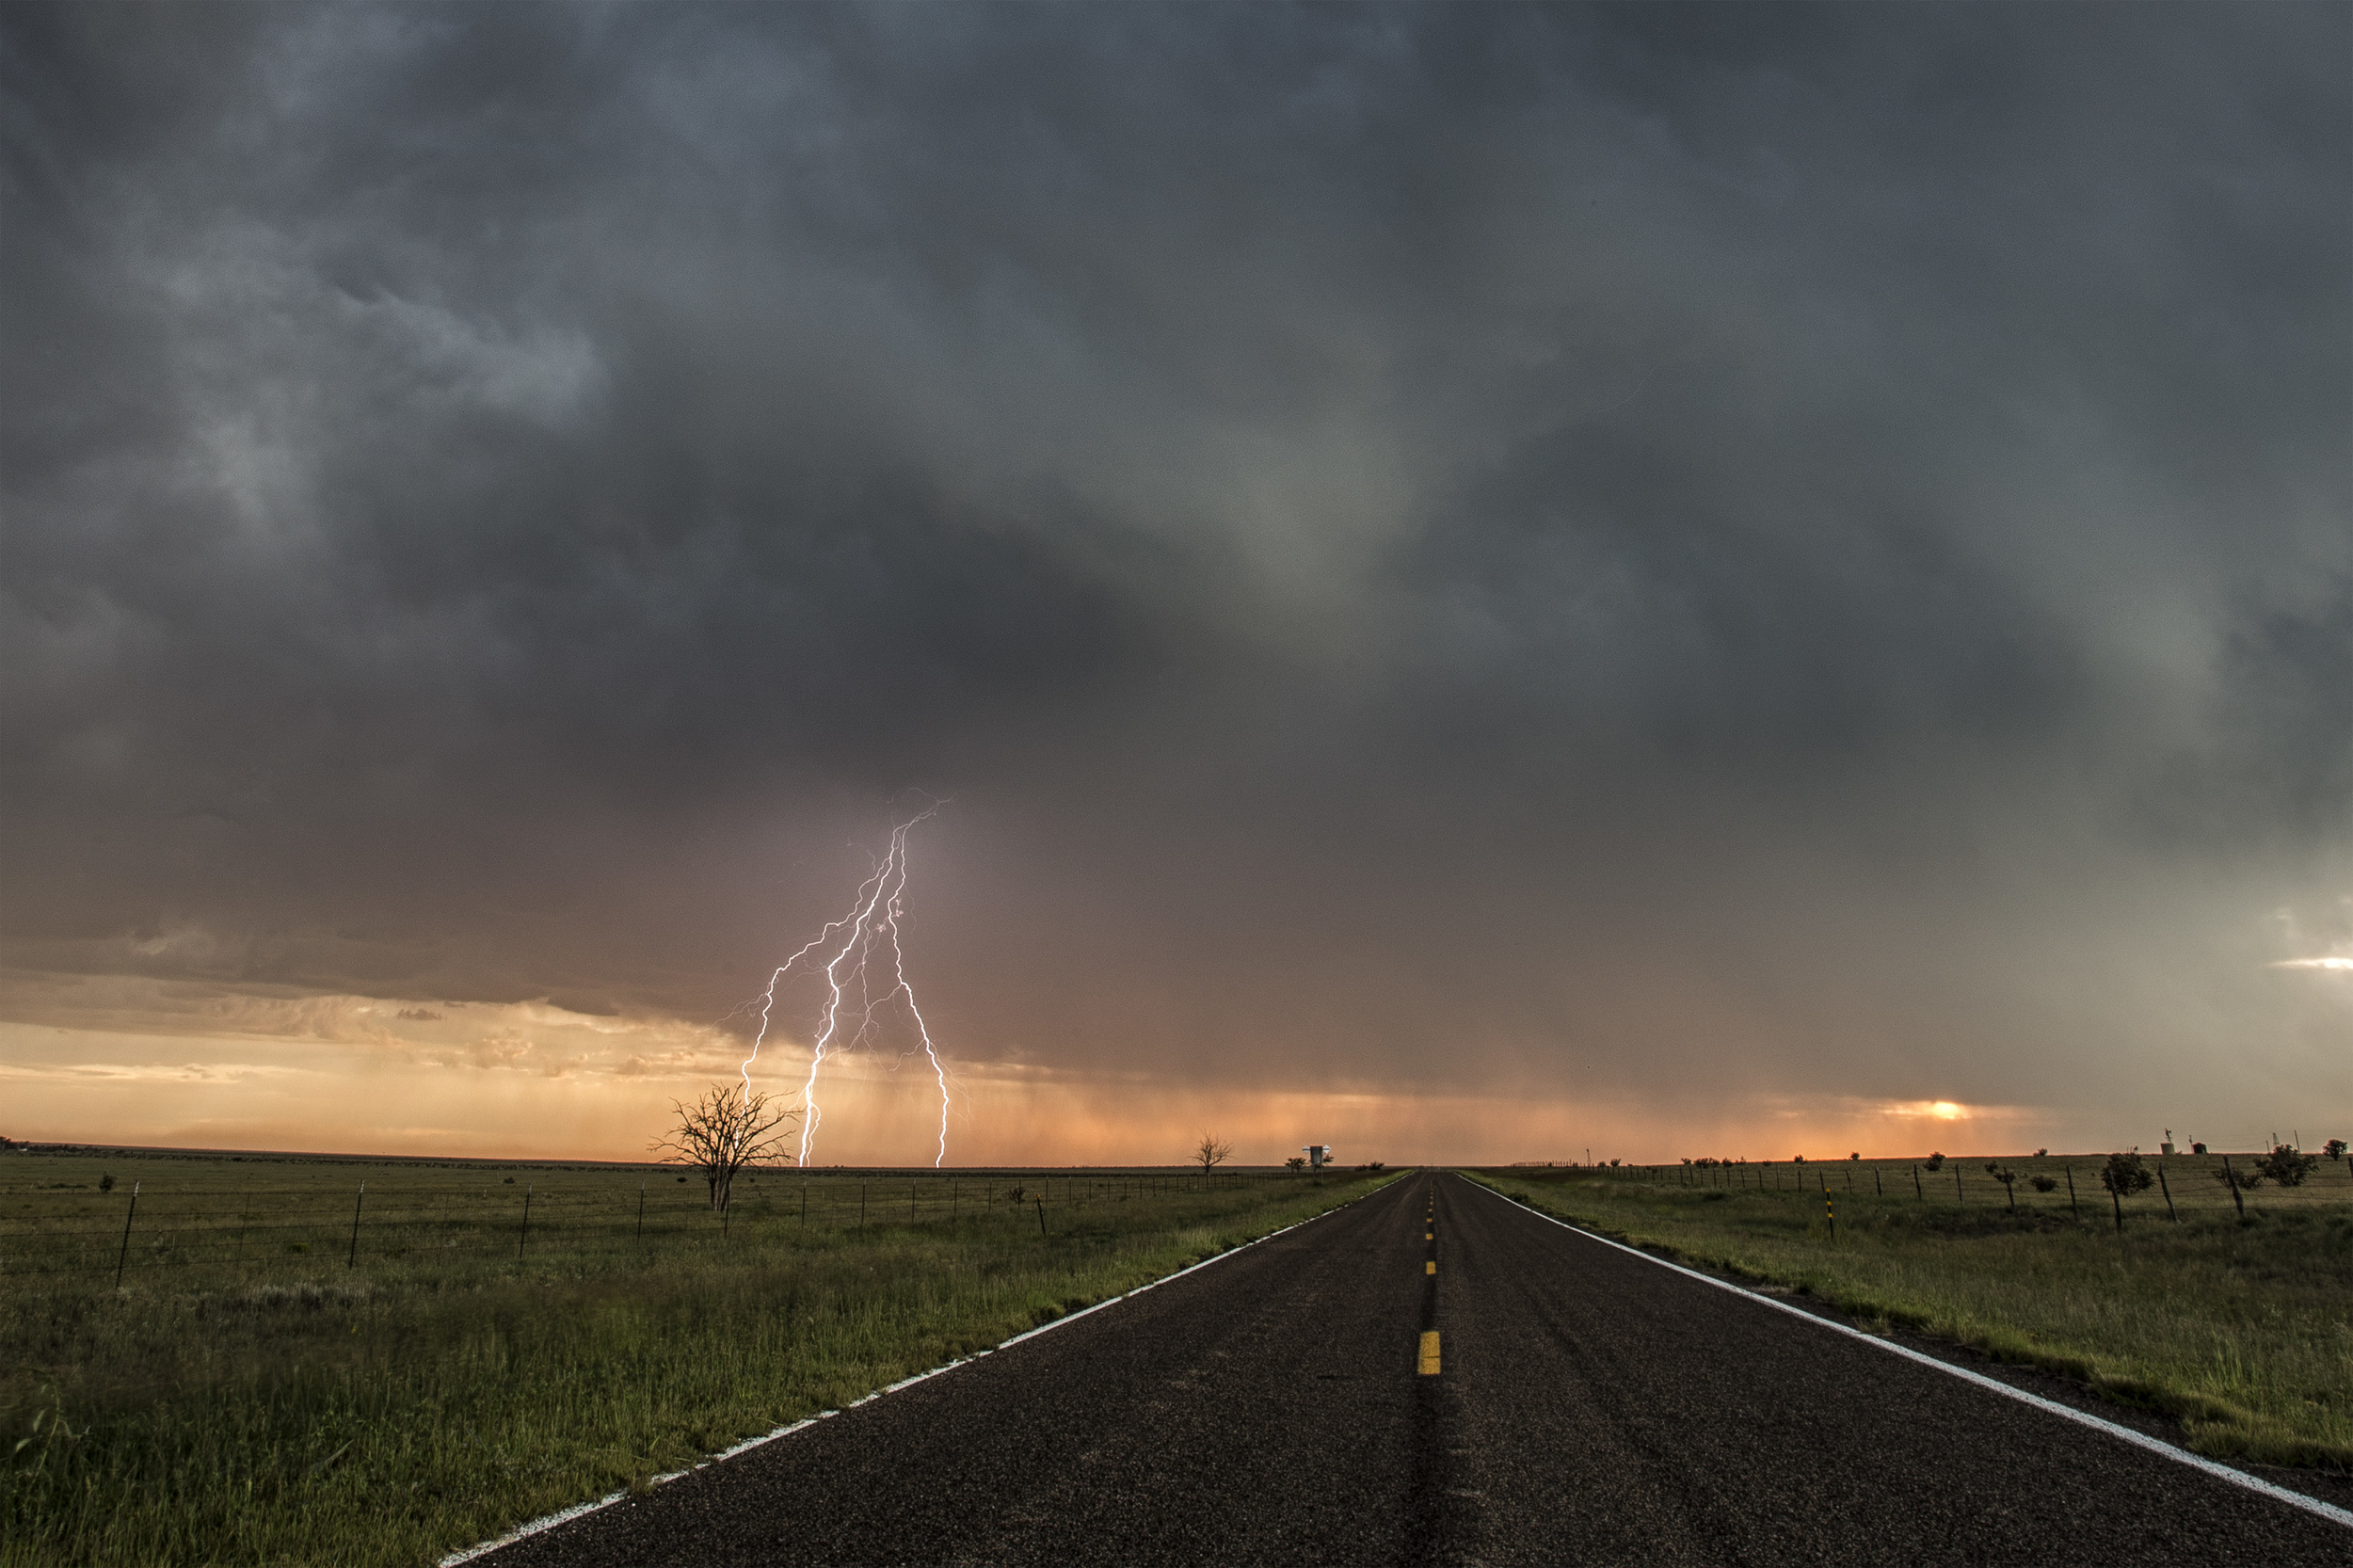  Lightning striking during a monsoon storm near Grady, New Mexico on August 17, 2013 